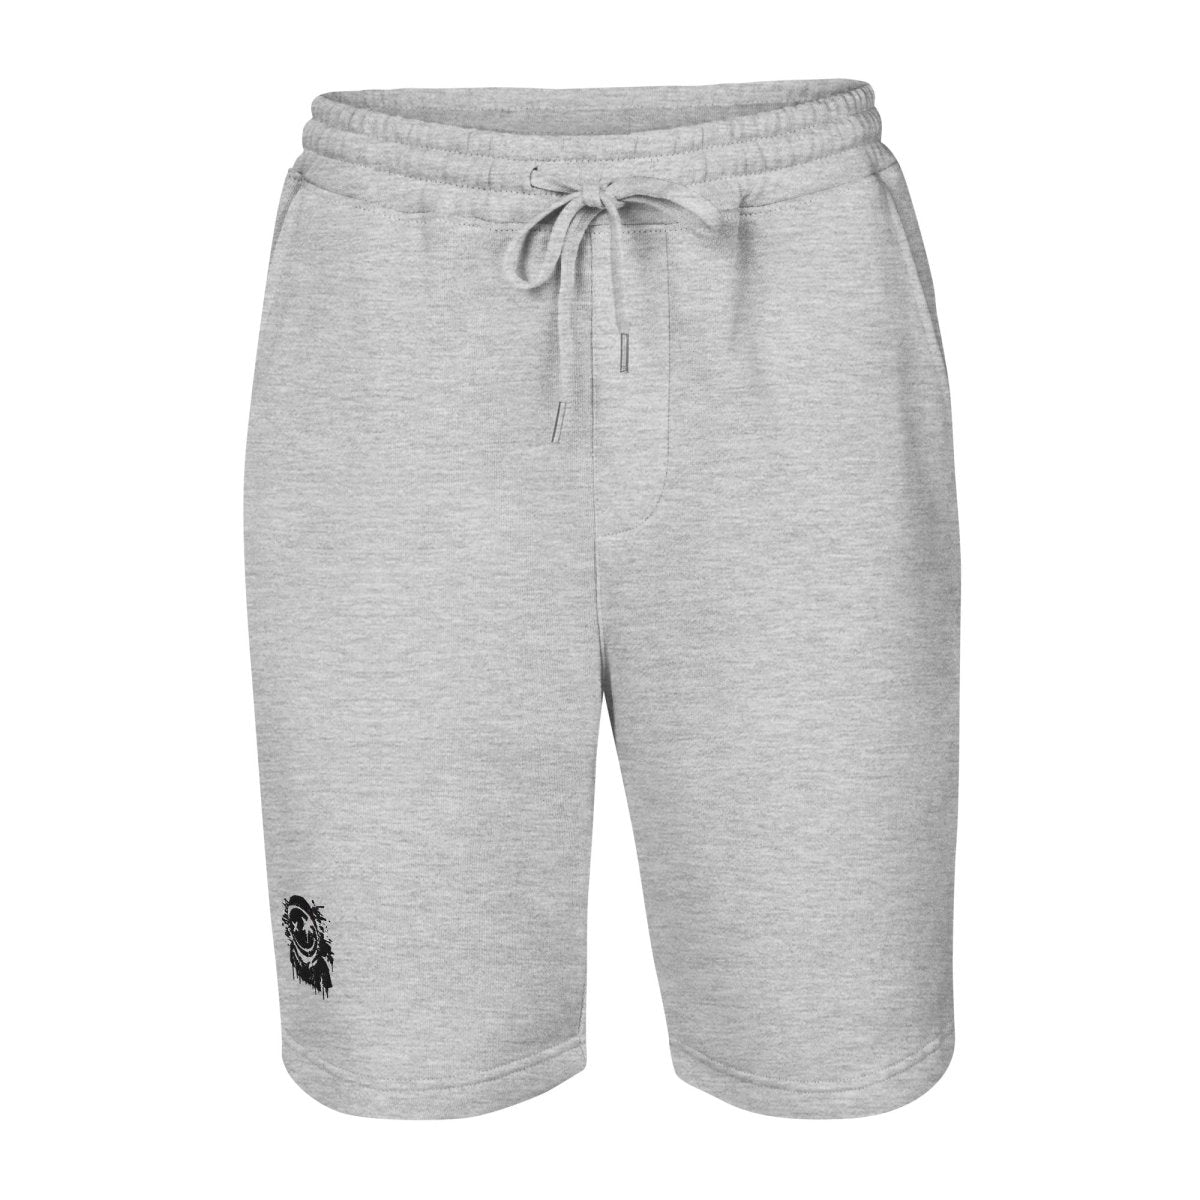 MH Classic Shorts Light Grey - Mainly High